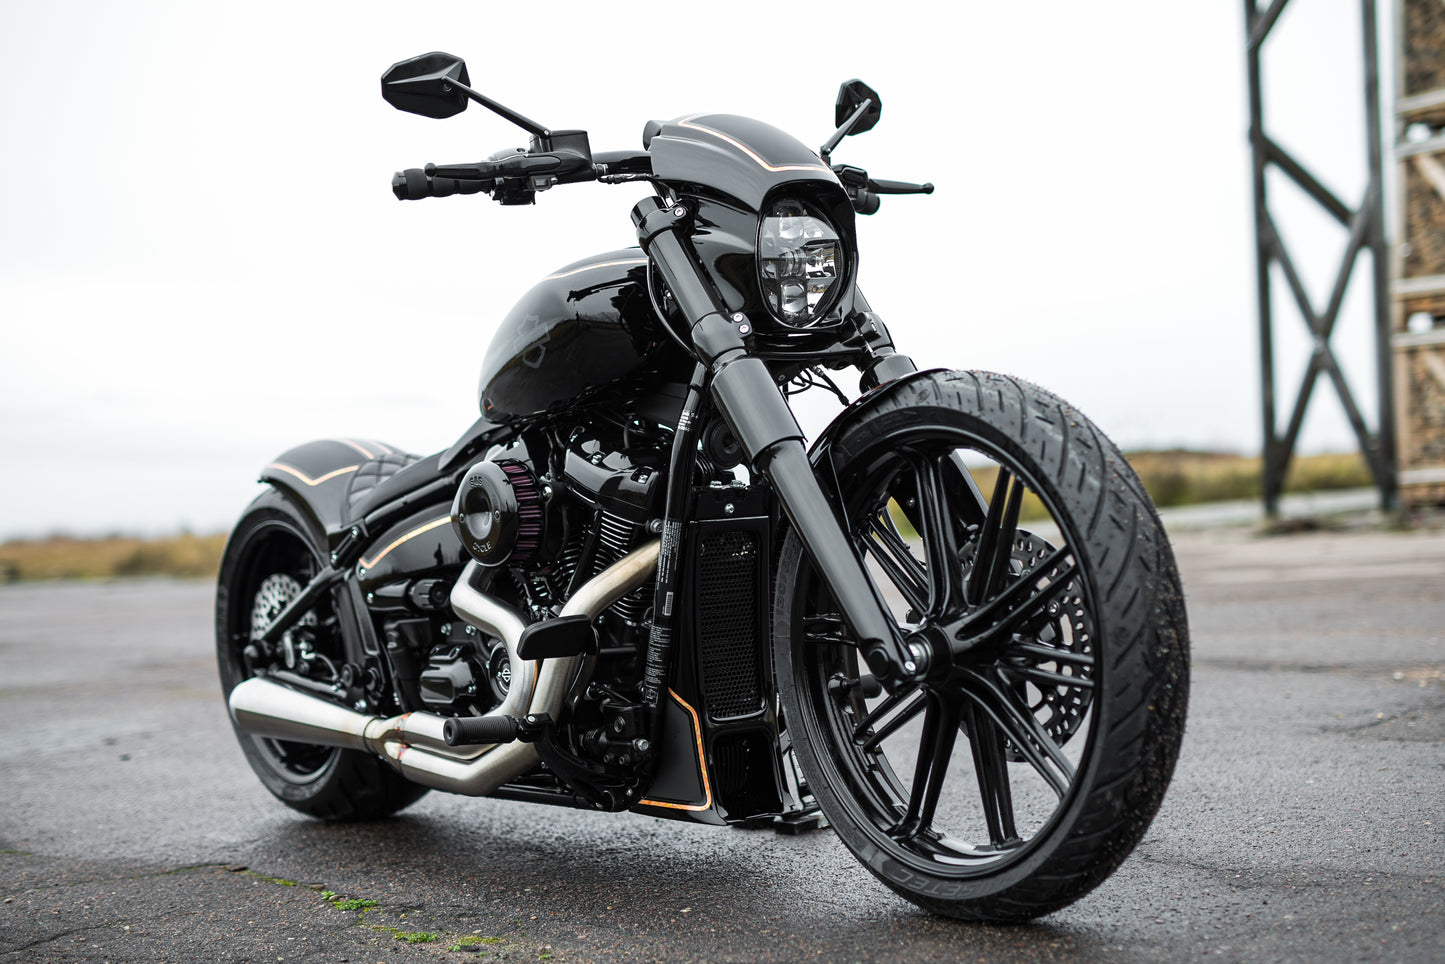 Harley Davidson motorcycle with Killer Custom "Aggressor" full fork cover set from the front blurry background